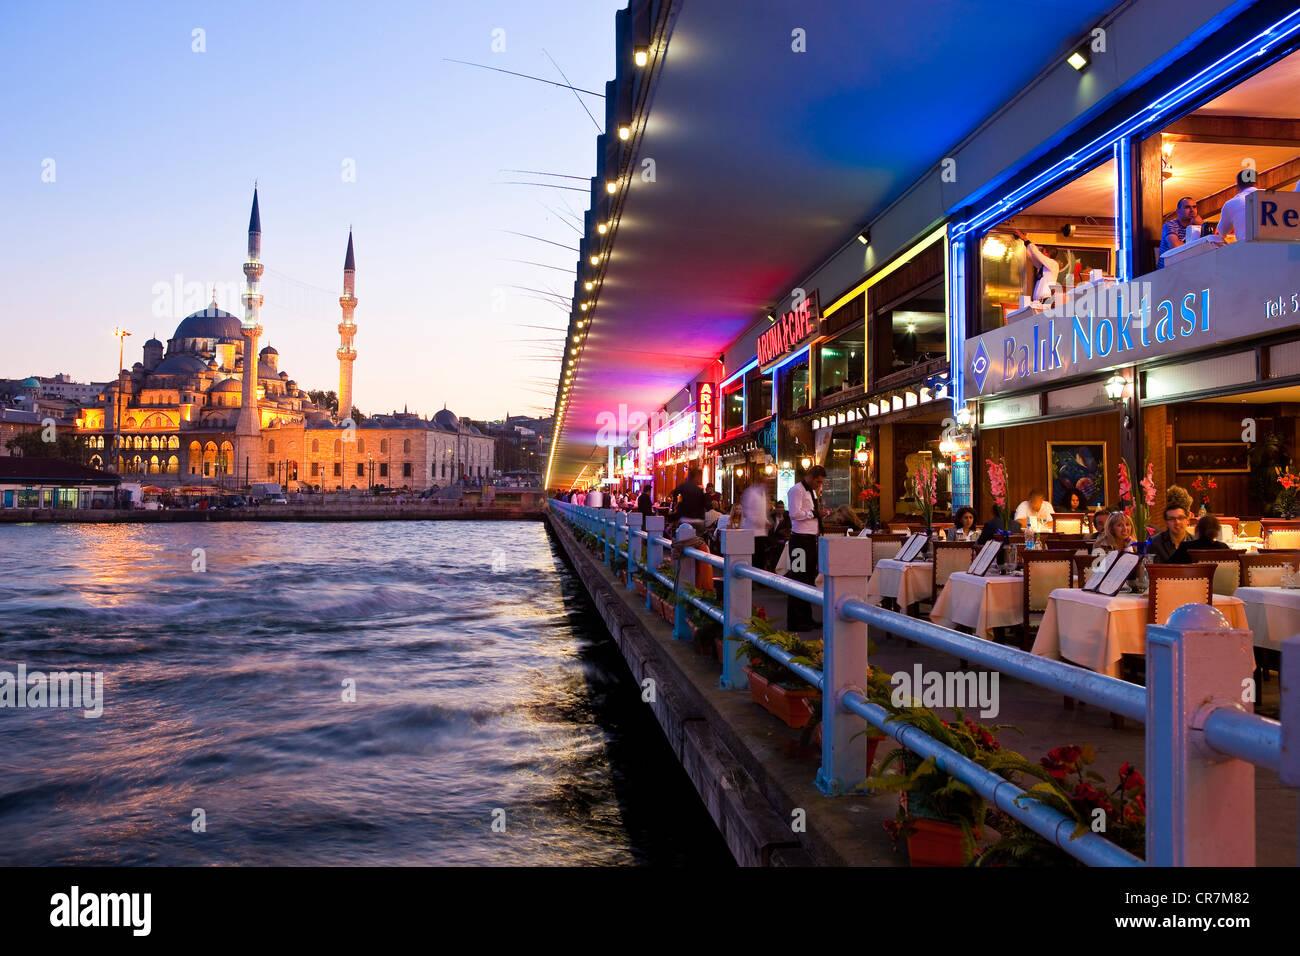 Turkey, Istanbul, Eminonu District, restaurants and trendy cafes under the Galata Bridge over the Golden Horn Strait, in the Stock Photo